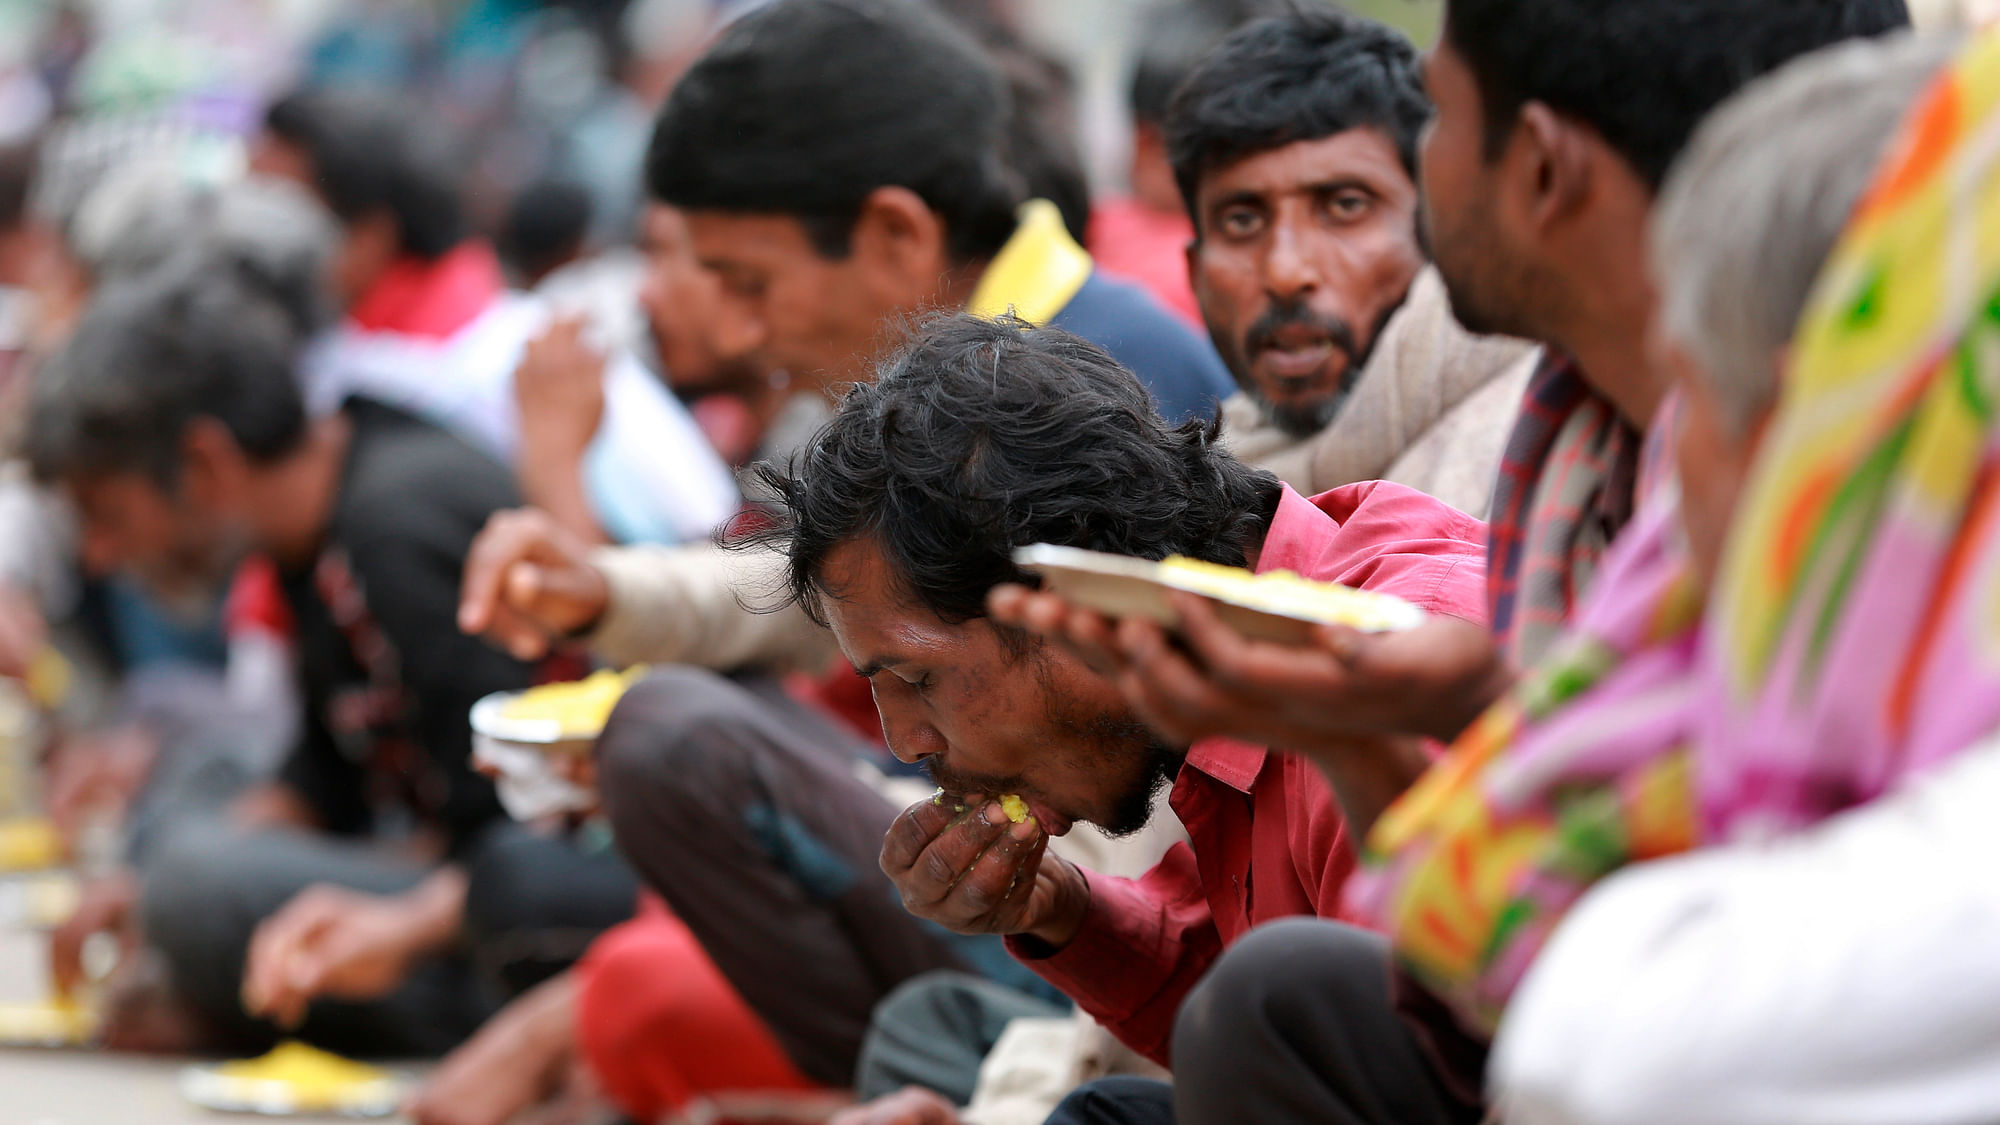 Abdul Khader spends eight thousand rupees per day to feed the migrants. Representational image.